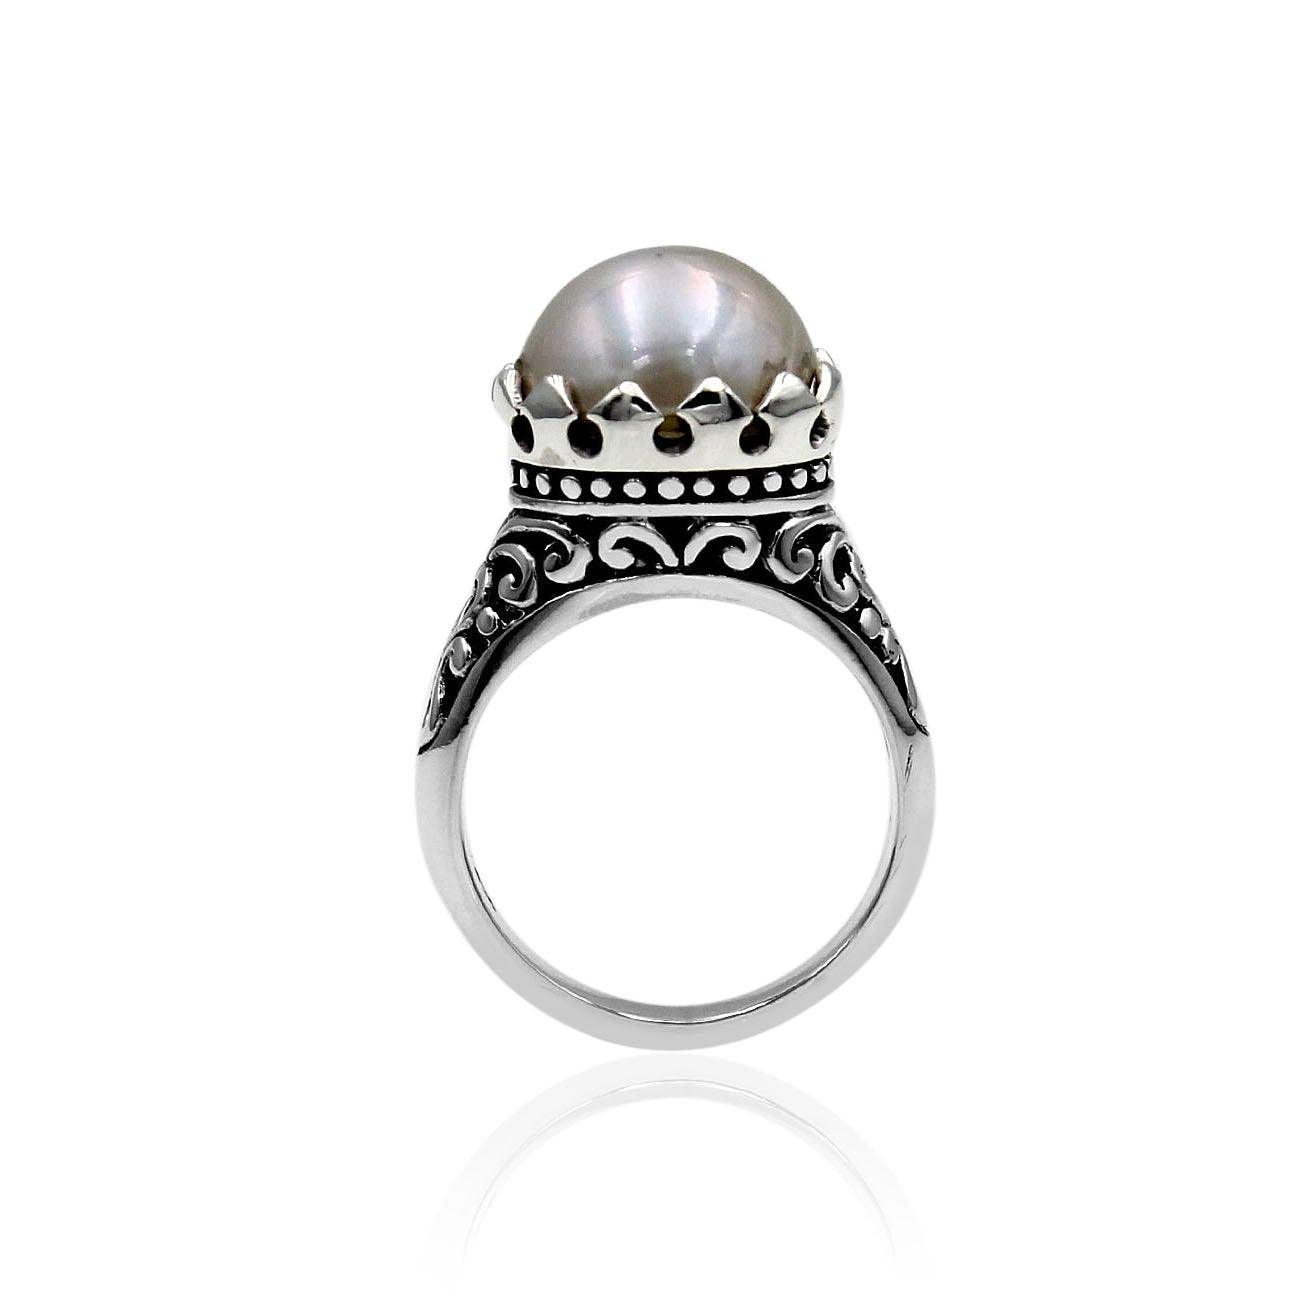 Handmade Victorian Mabe Fresh Water Pearl Cocktail Ring in 925 Sterling Silver - Size L , M , N , O , P , Q - Inspiring Jewellery